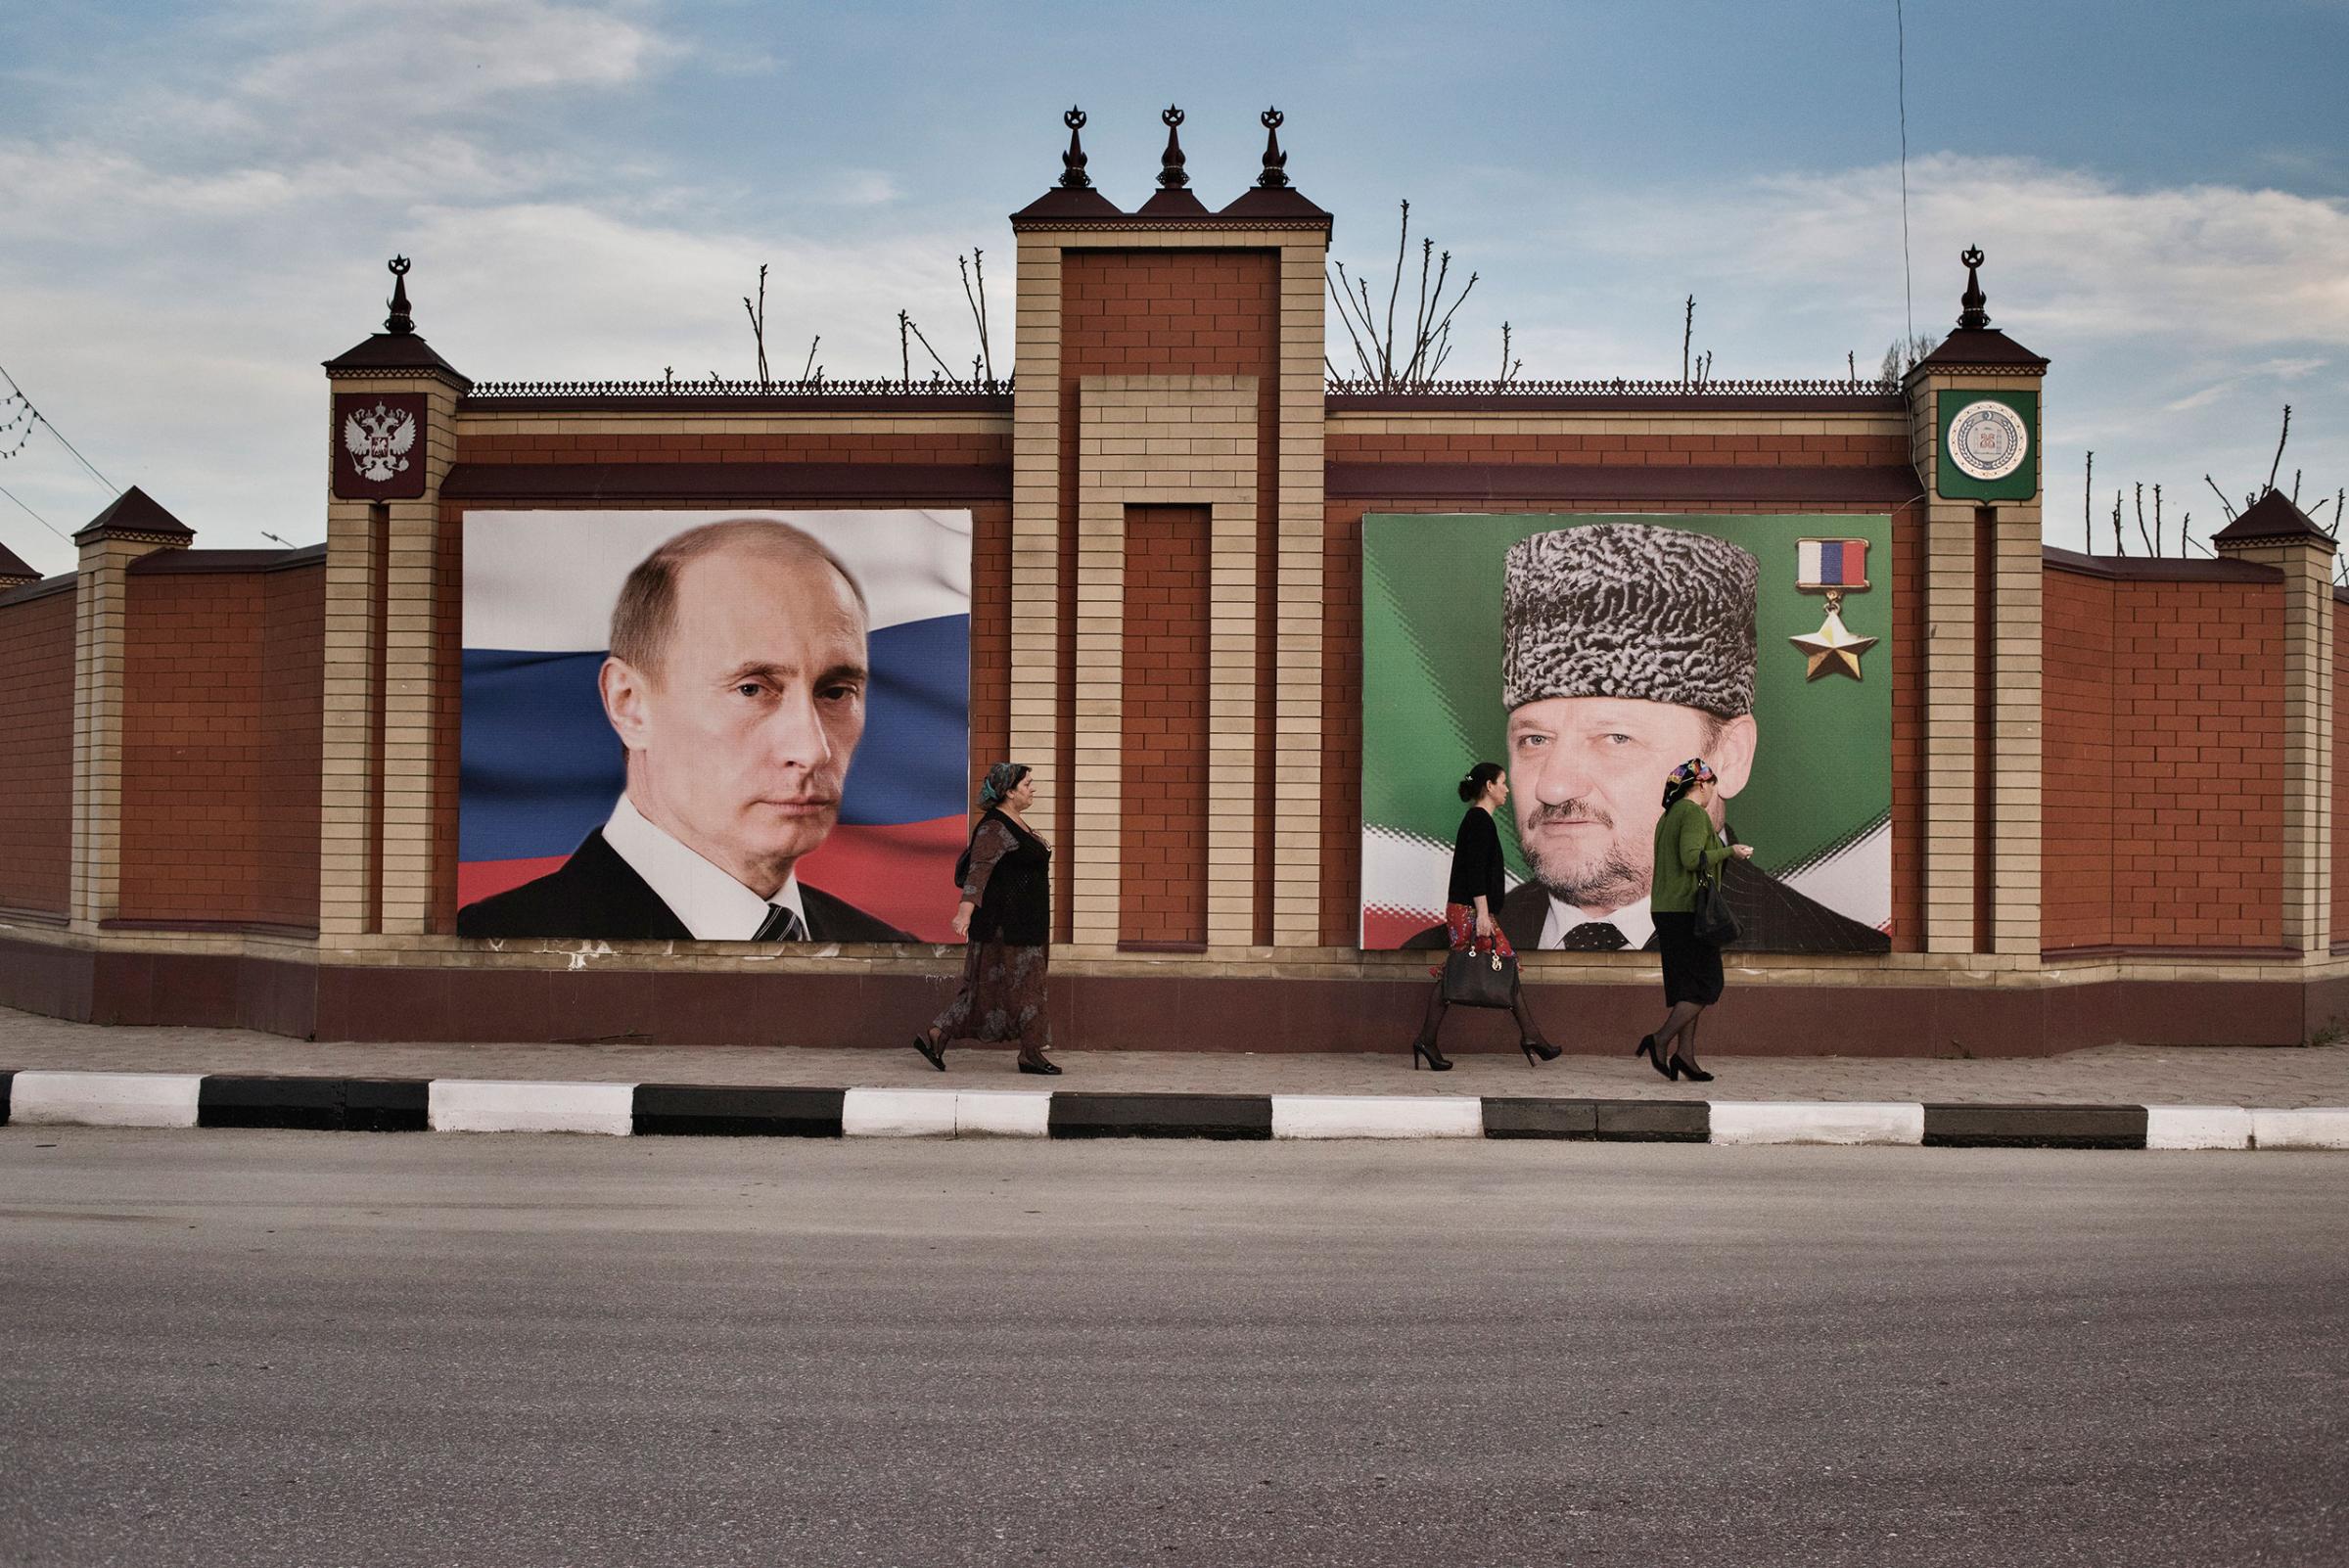 Women pass by a portrait of Russian President Vladimir Putin and the late President of Chechnya Akhmat Kadyrov in Grozny, Chechnya, April 18, 2015.